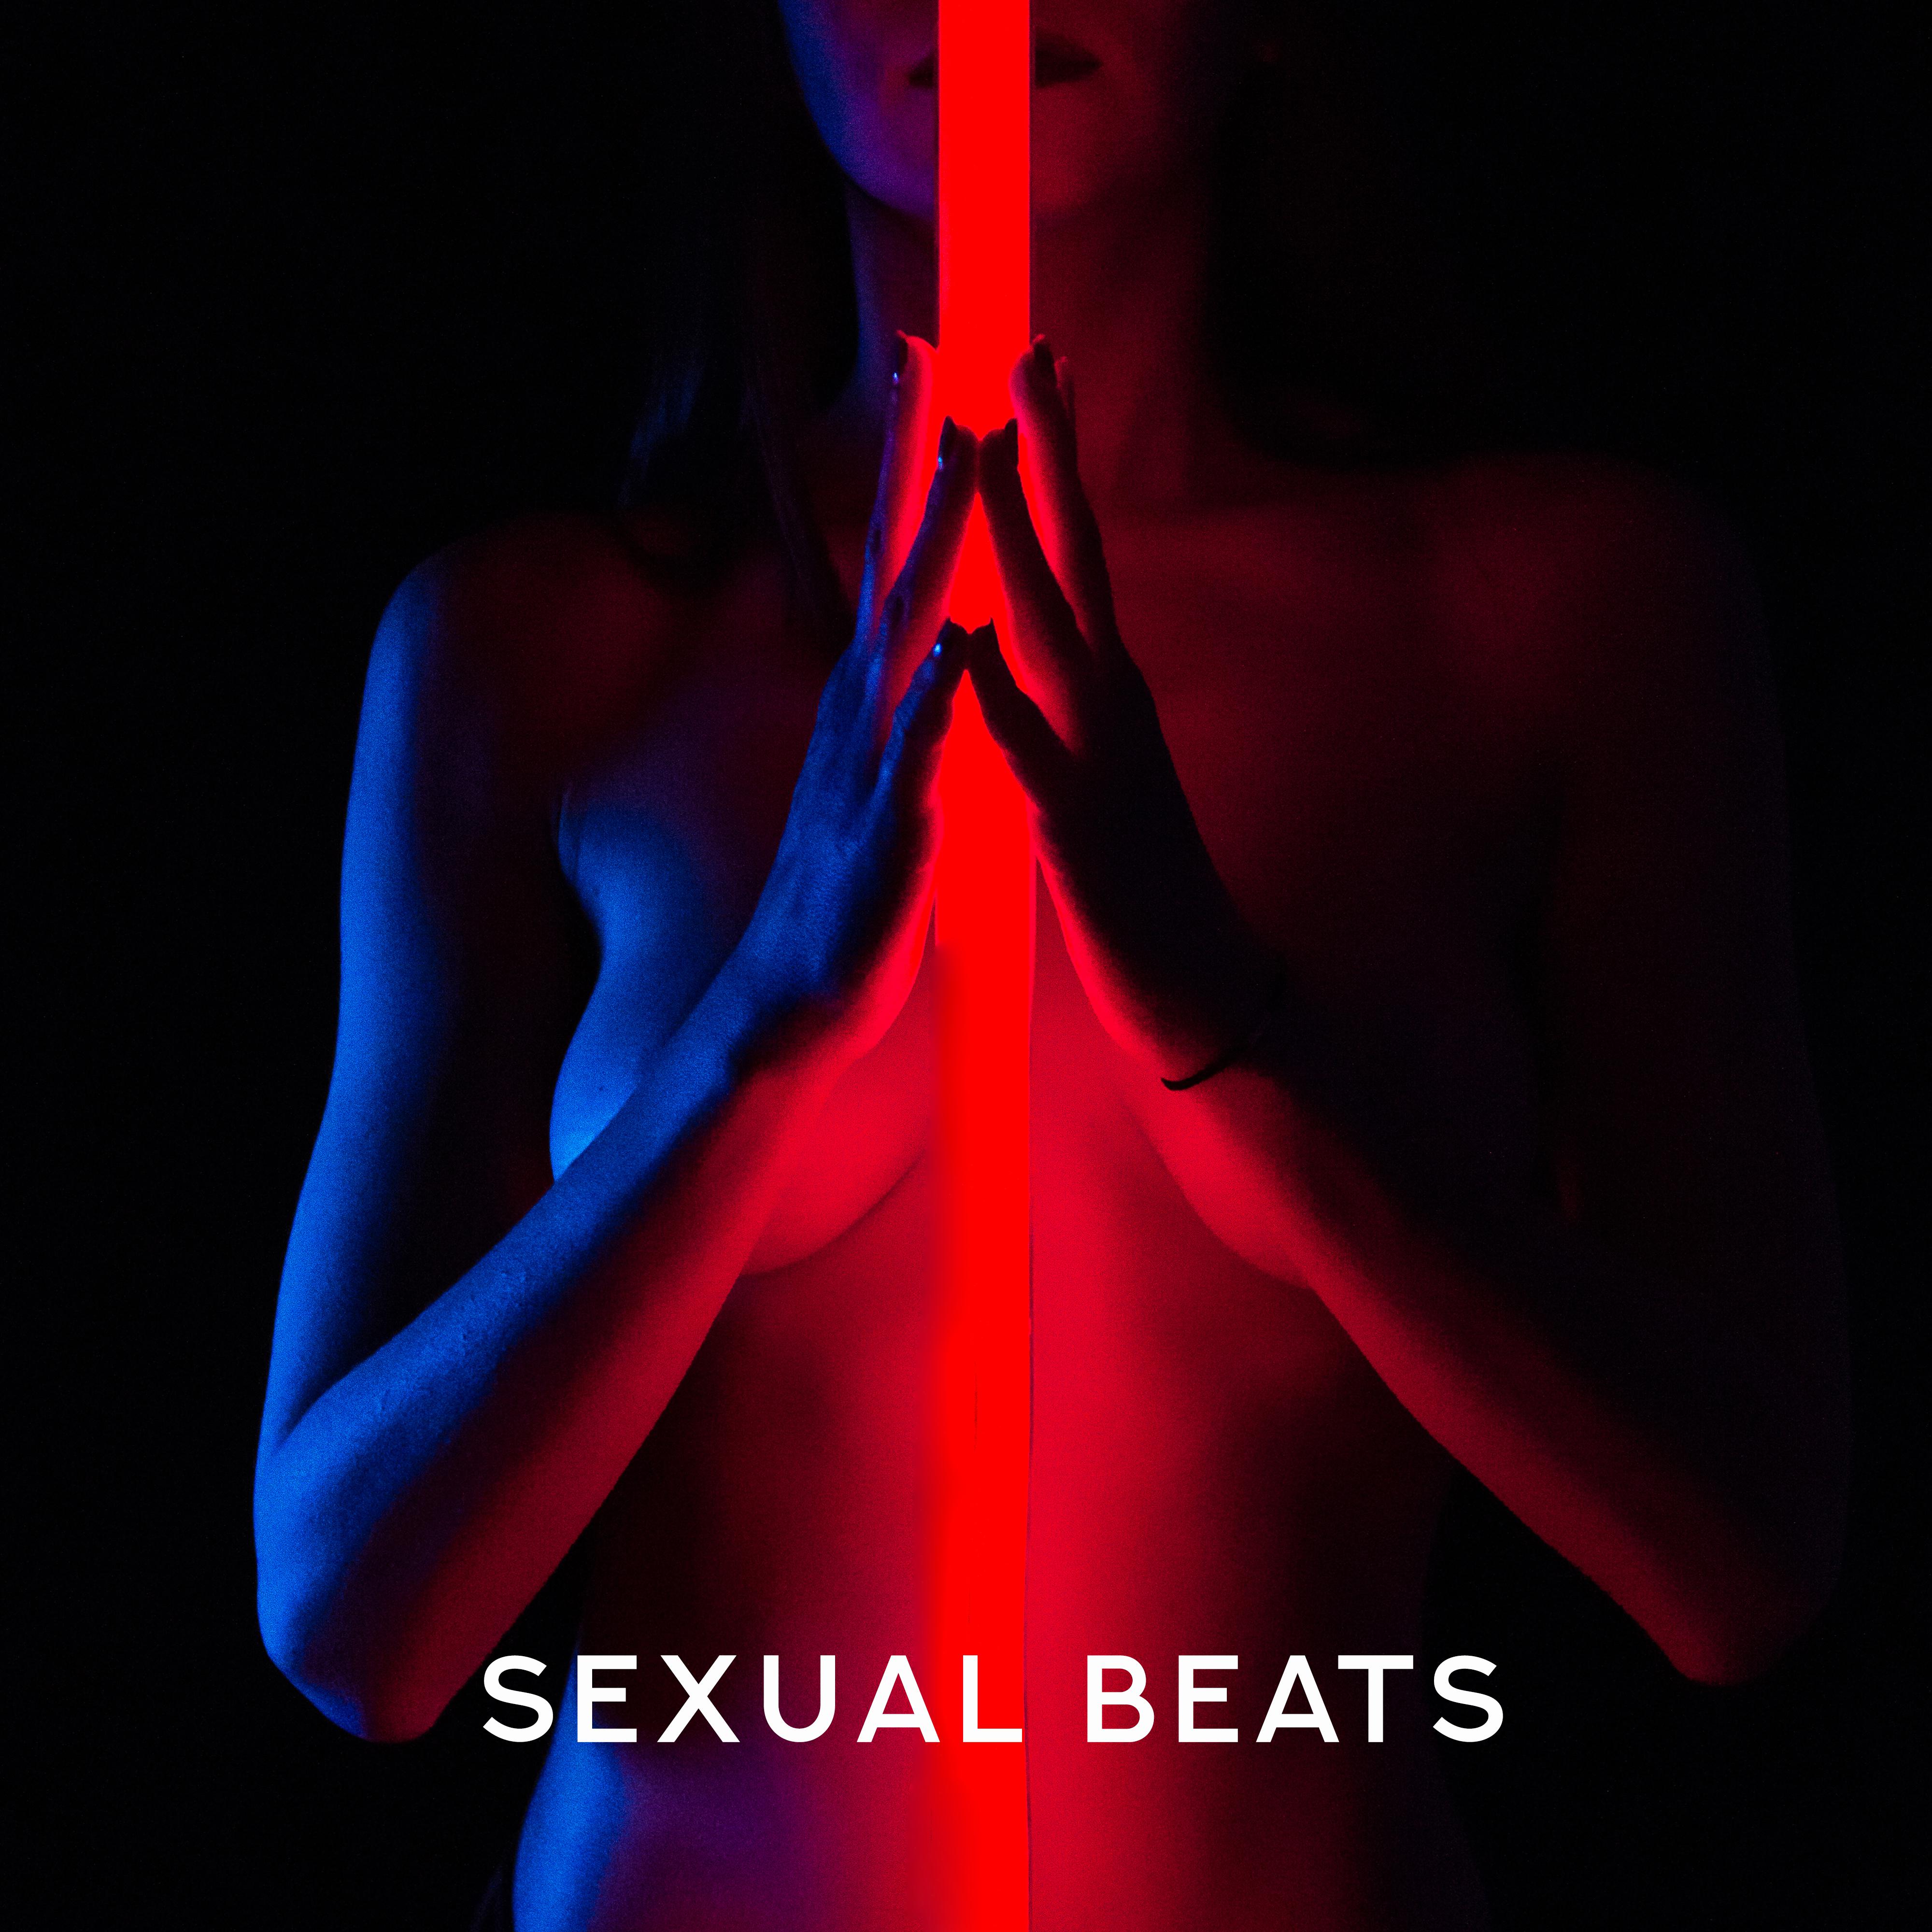 Sexual Beats - Seductive, Erotic and Sexy Chillout Music